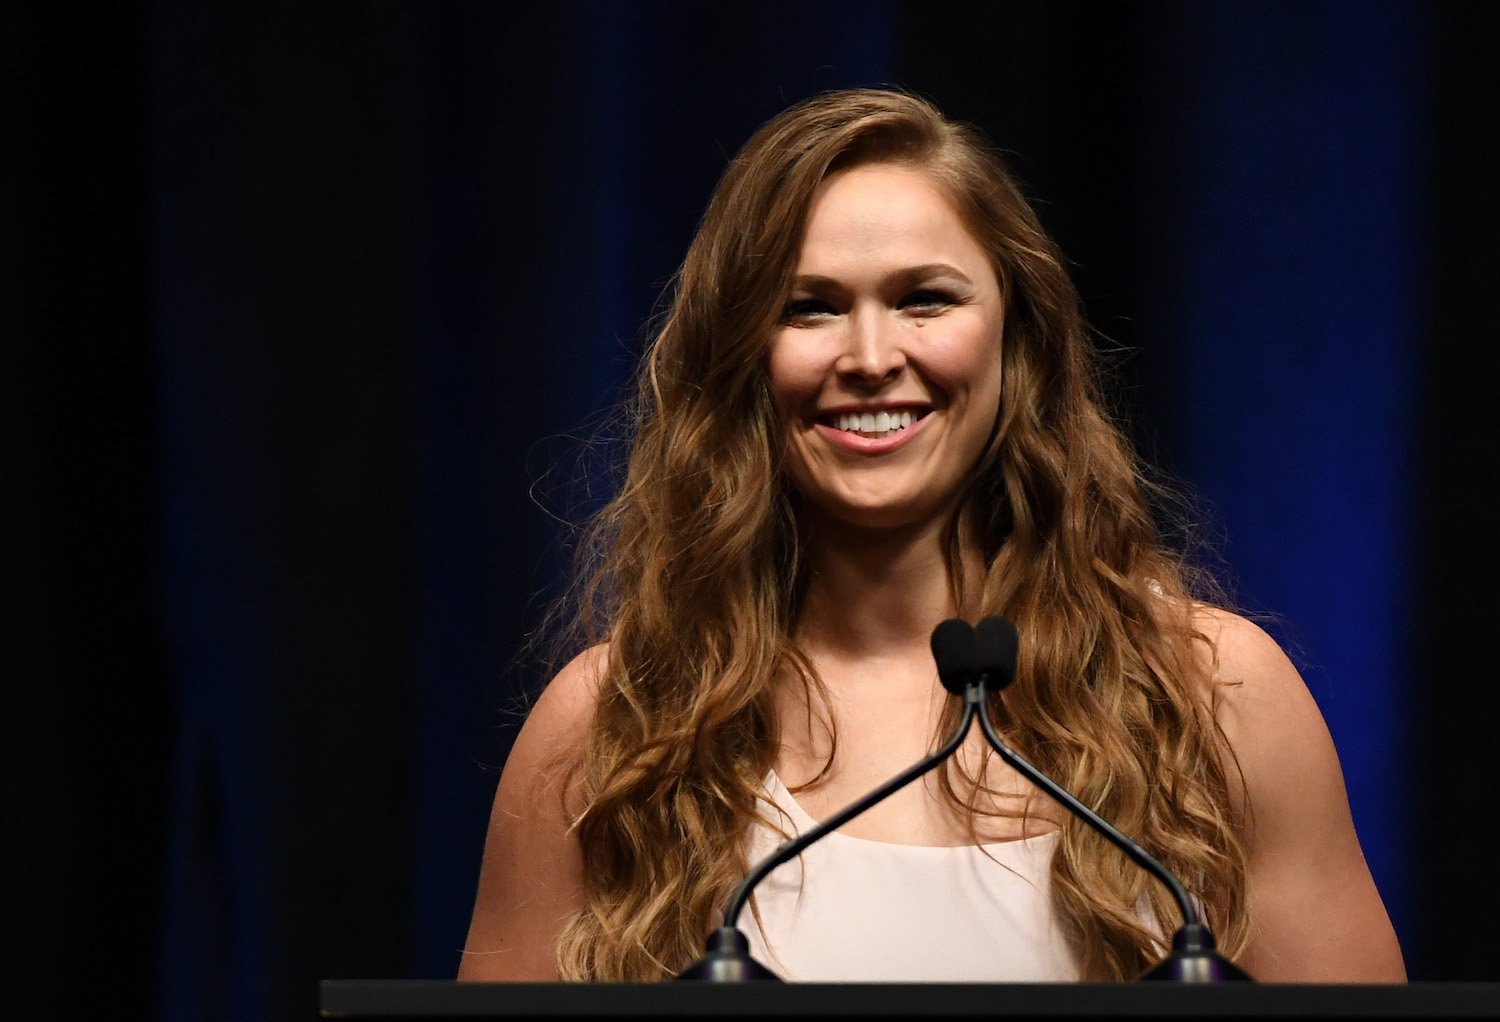 Ronda Rousey Has an Impressive Net Worth and She Keeps Adding to It